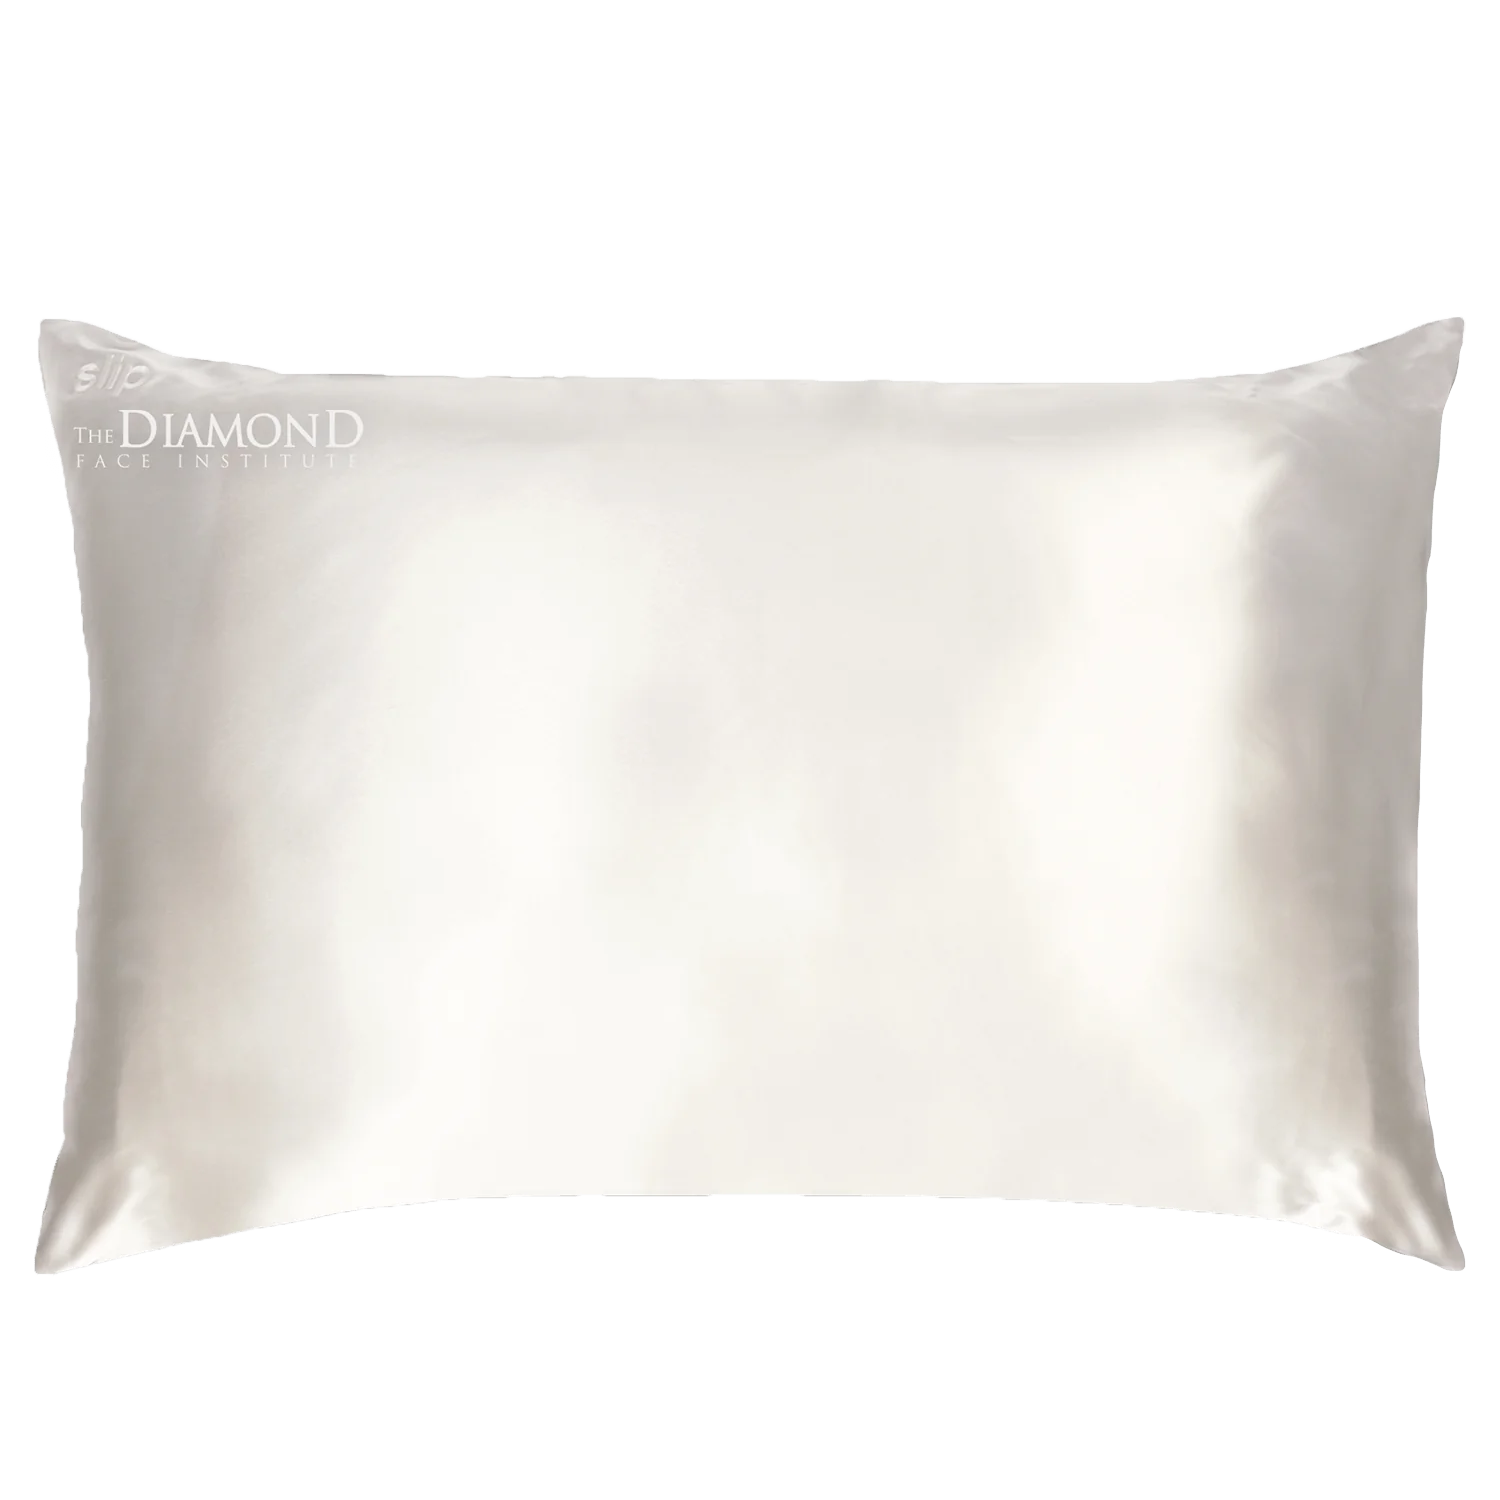 Monogrammed Pillowcase in ivory